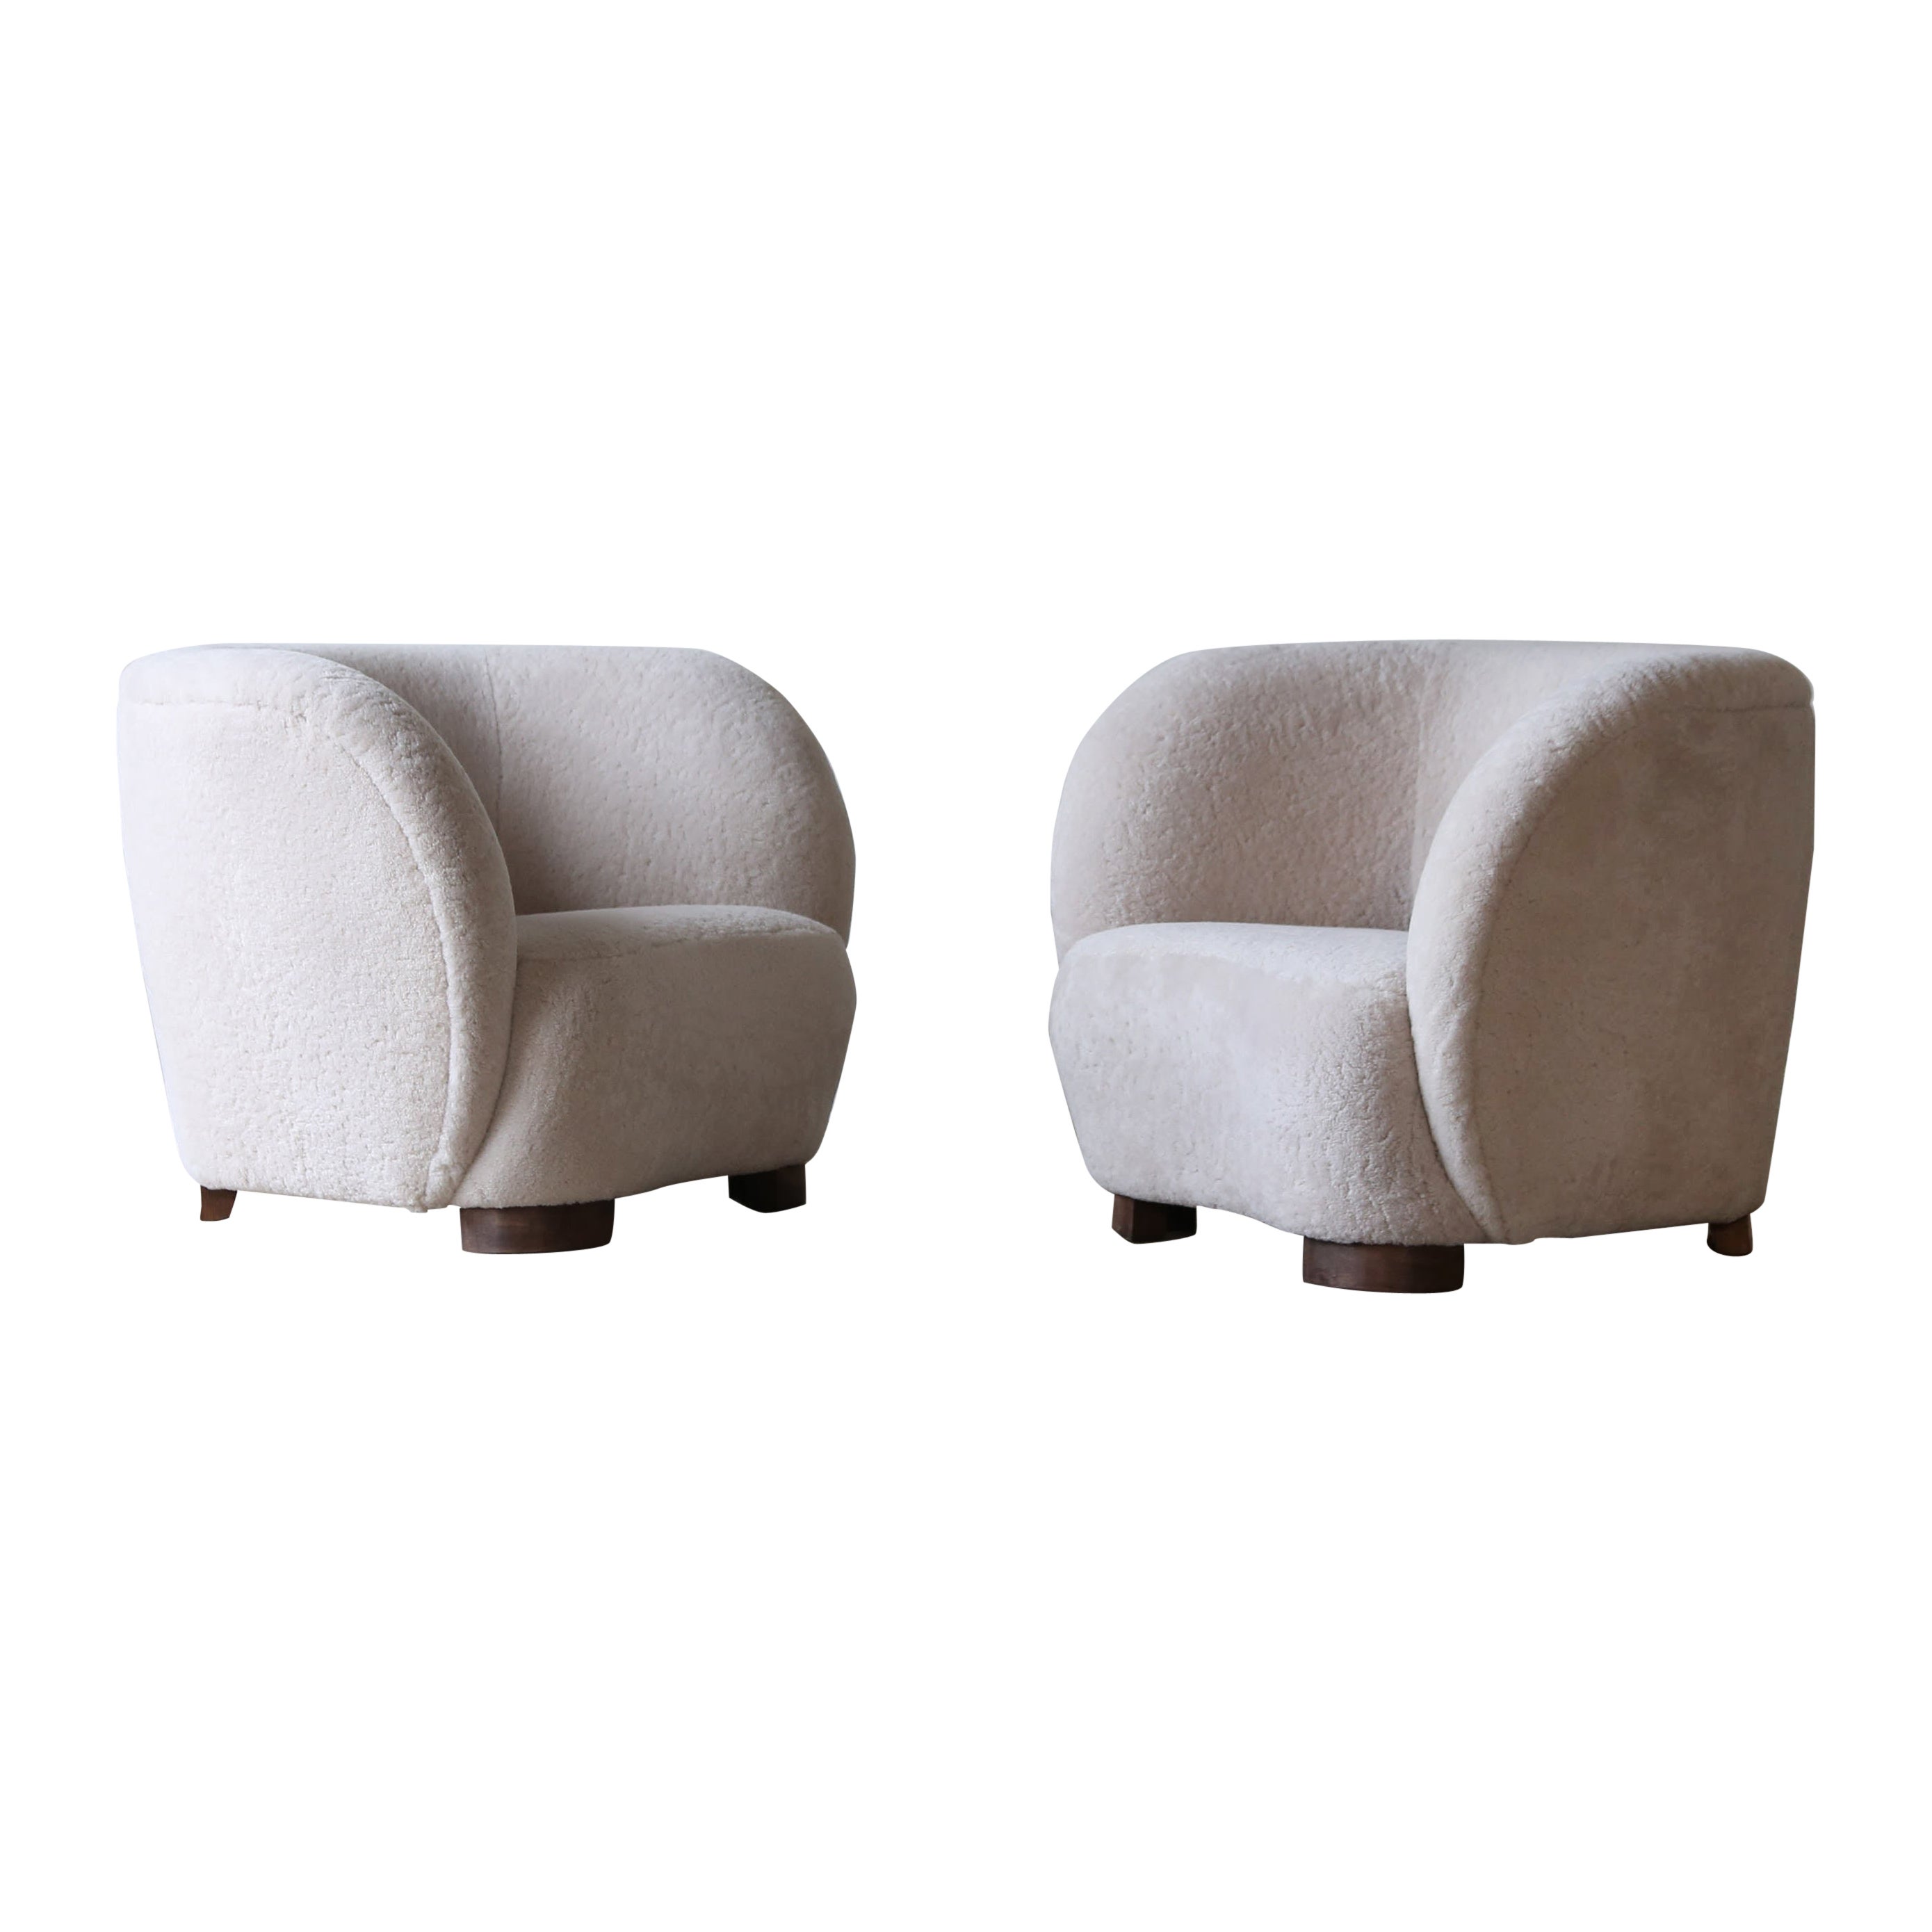 A Pair of Armchairs in Natural Sheepskin Upholstery For Sale